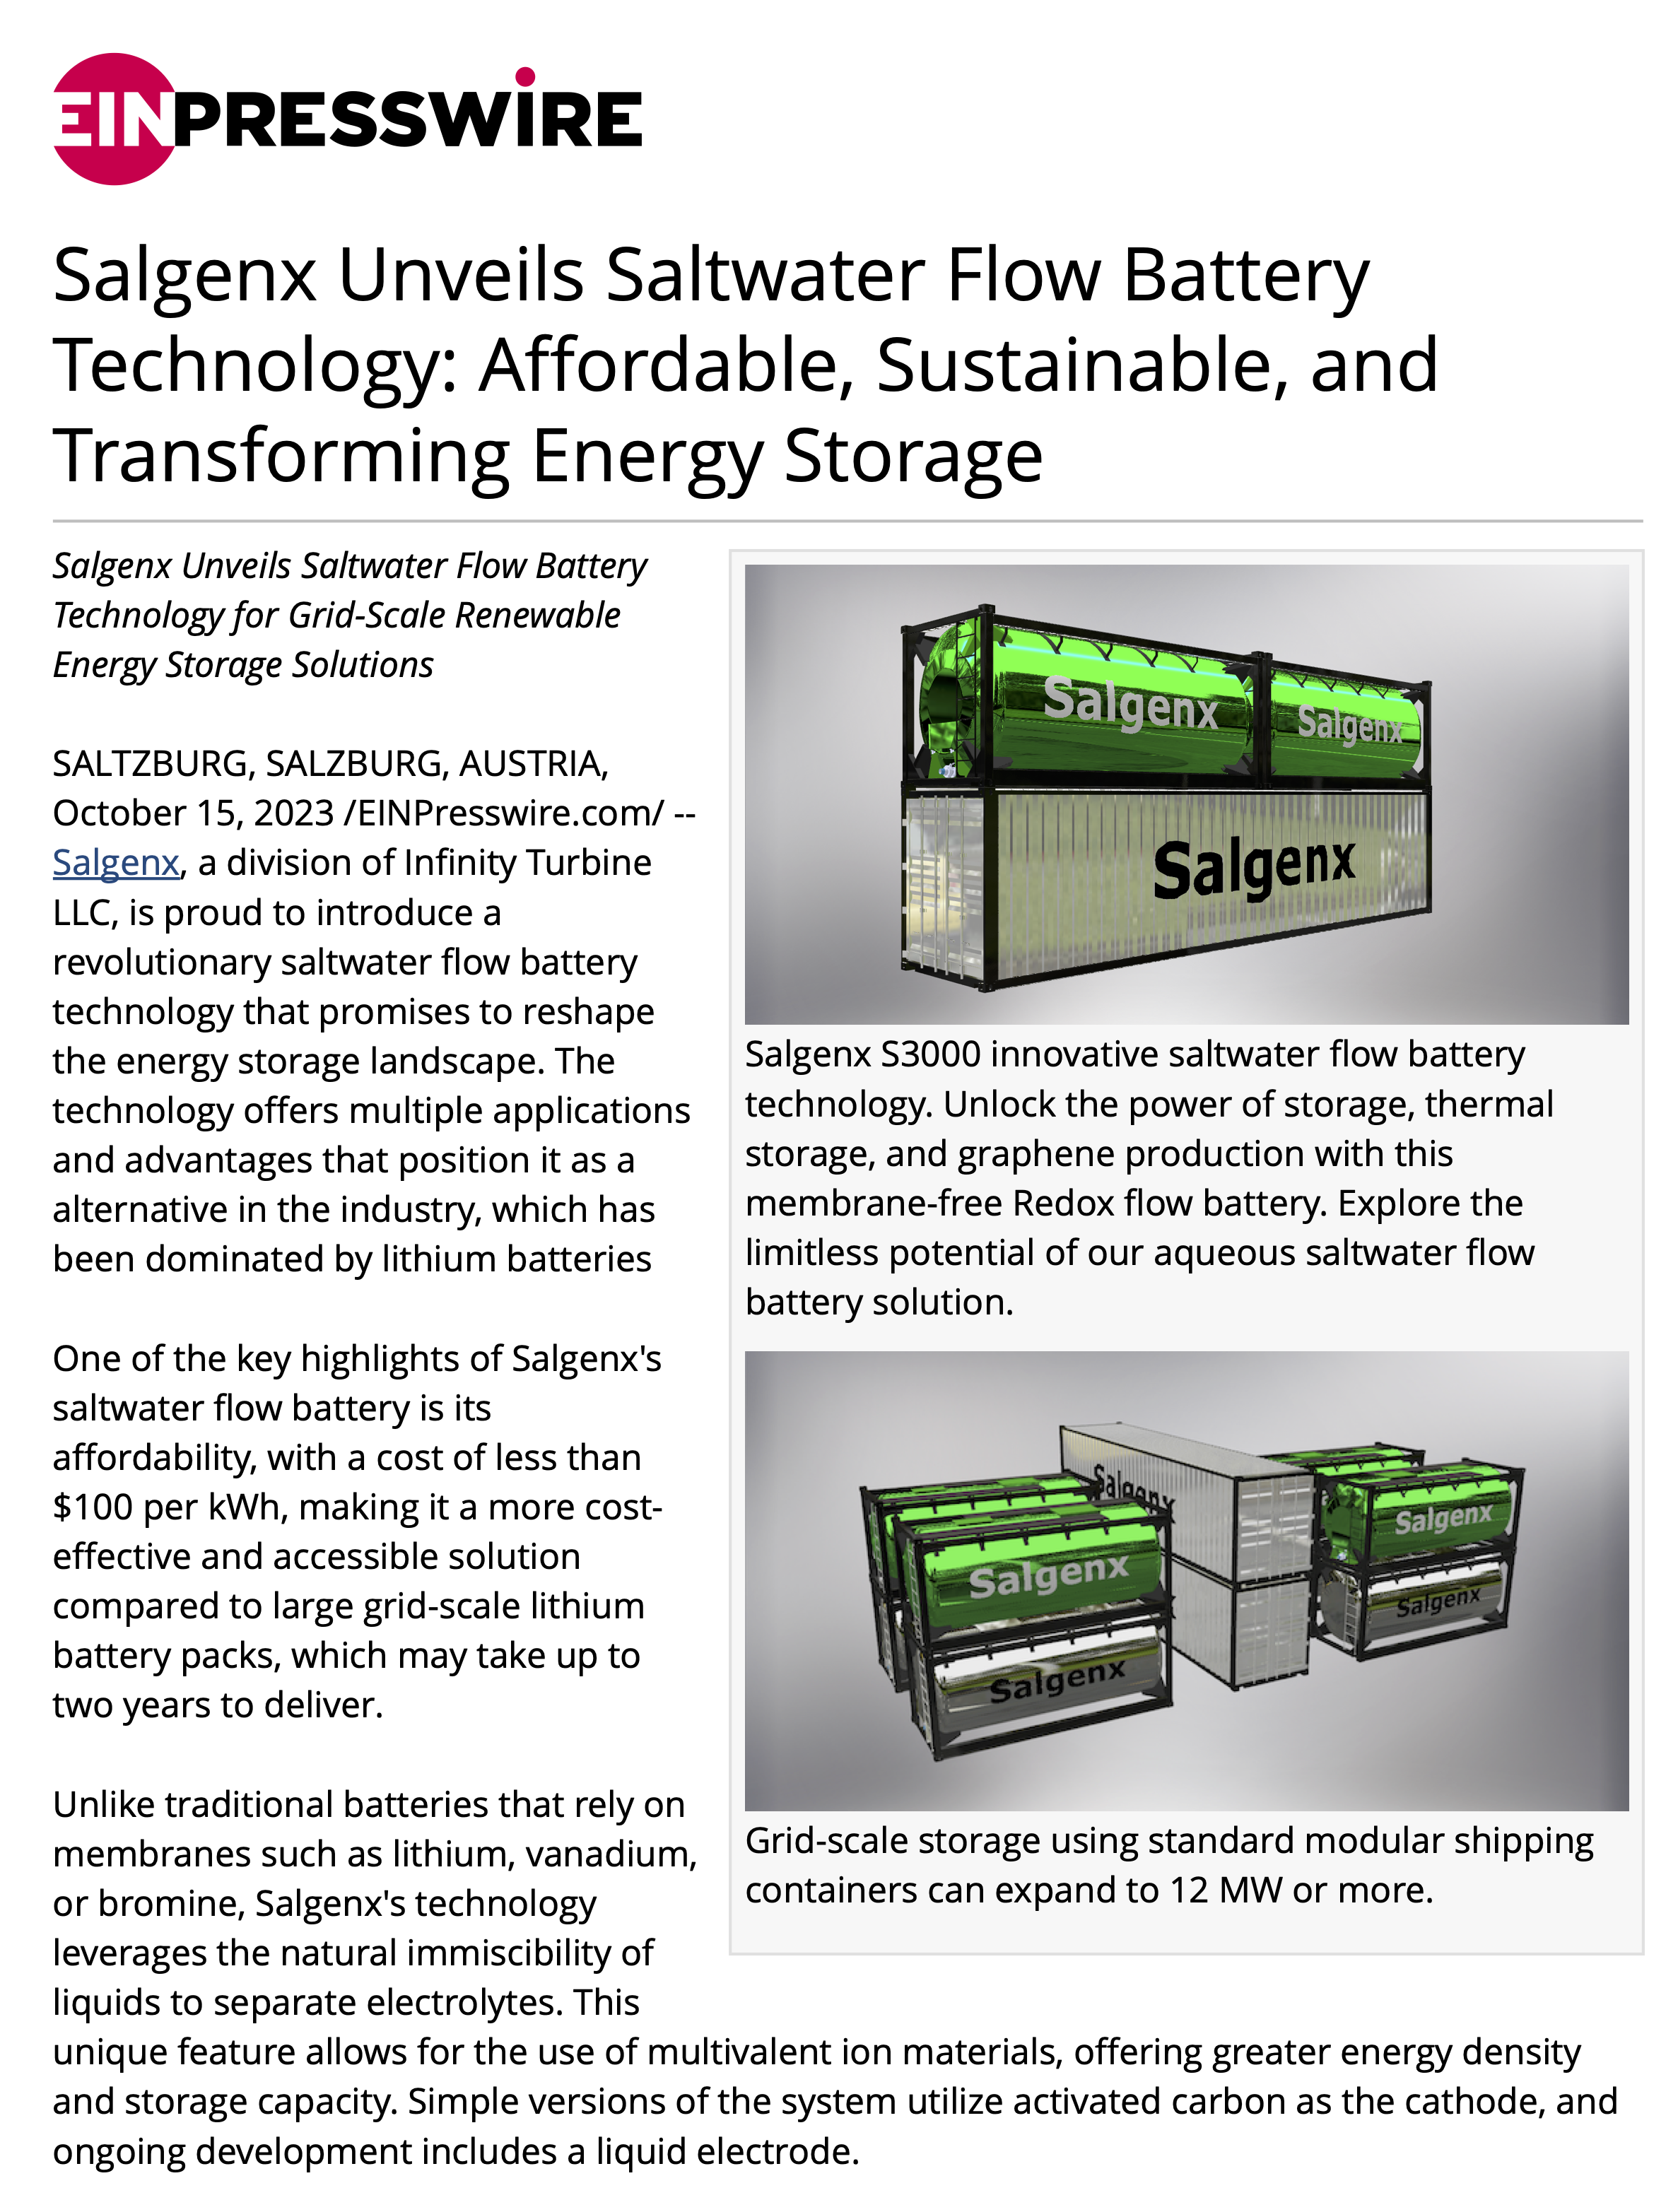 Salgenx Unveils Saltwater Flow Battery Technology: Affordable, Sustainable, and Transforming Energy Storage